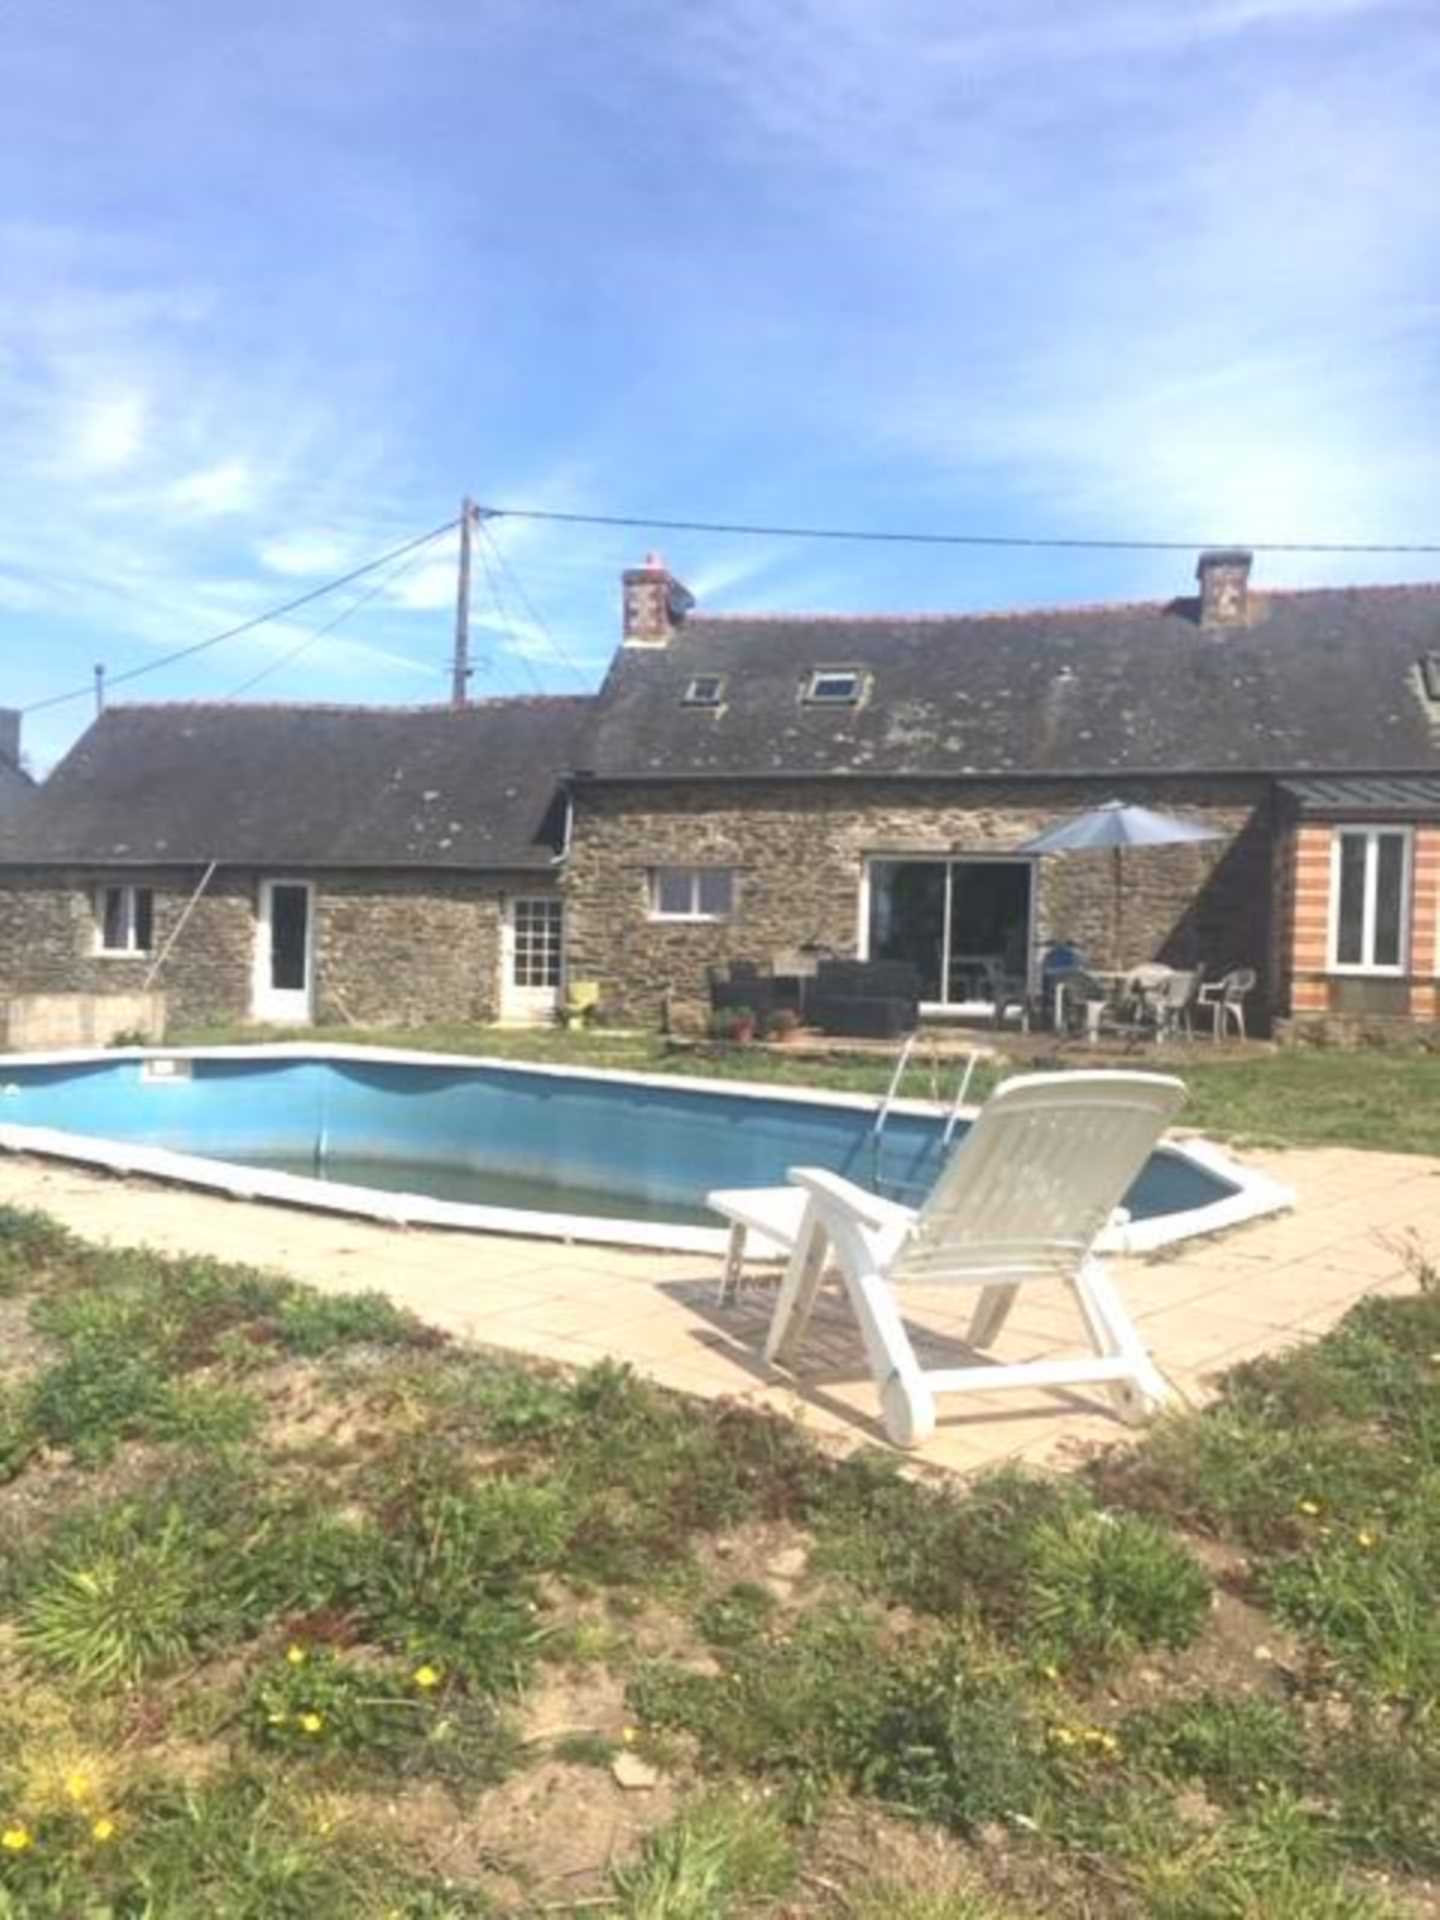 France superb family home in the country with  scope to create additional rooms if needed more than meets the eye, Image 2